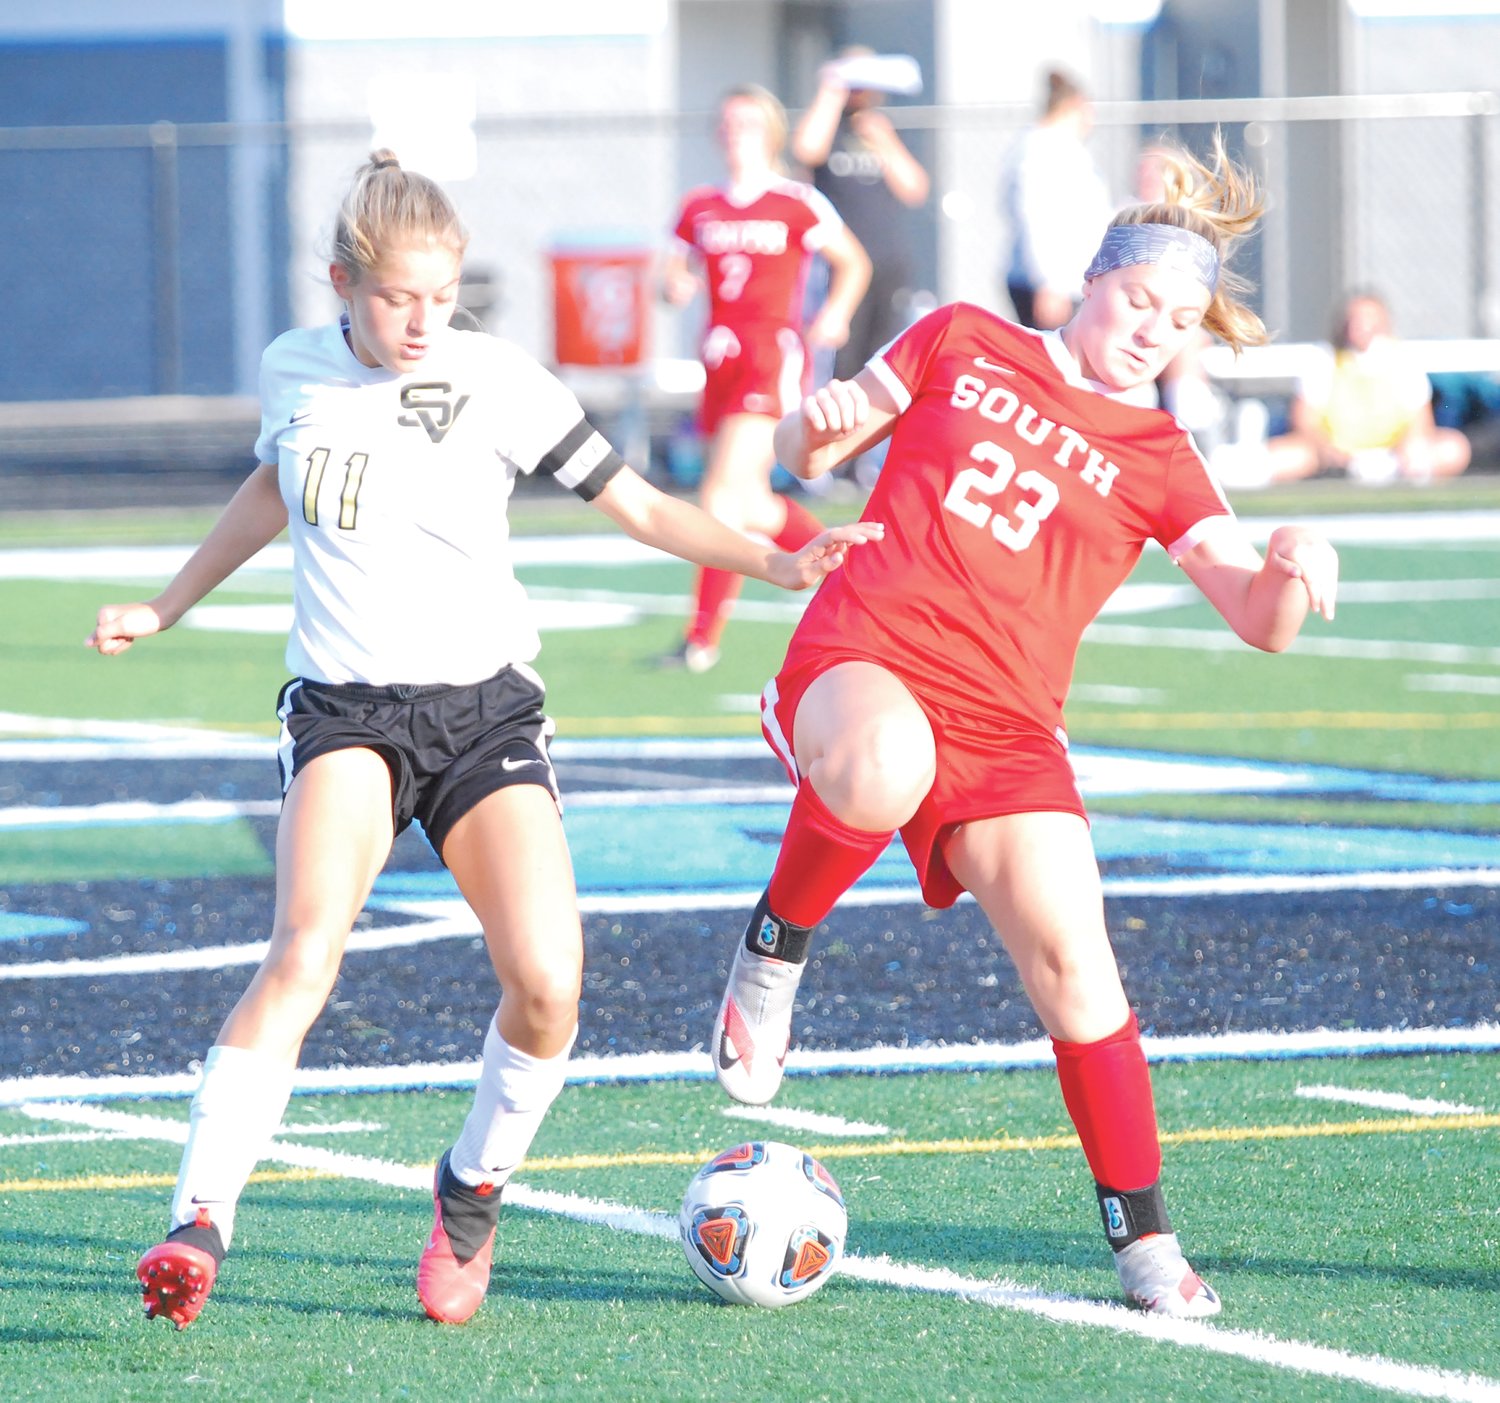 Southmont's Addison Charles battles for the ball in the Mounties' 2-0 sectional win over South Vermillion on Thursday.